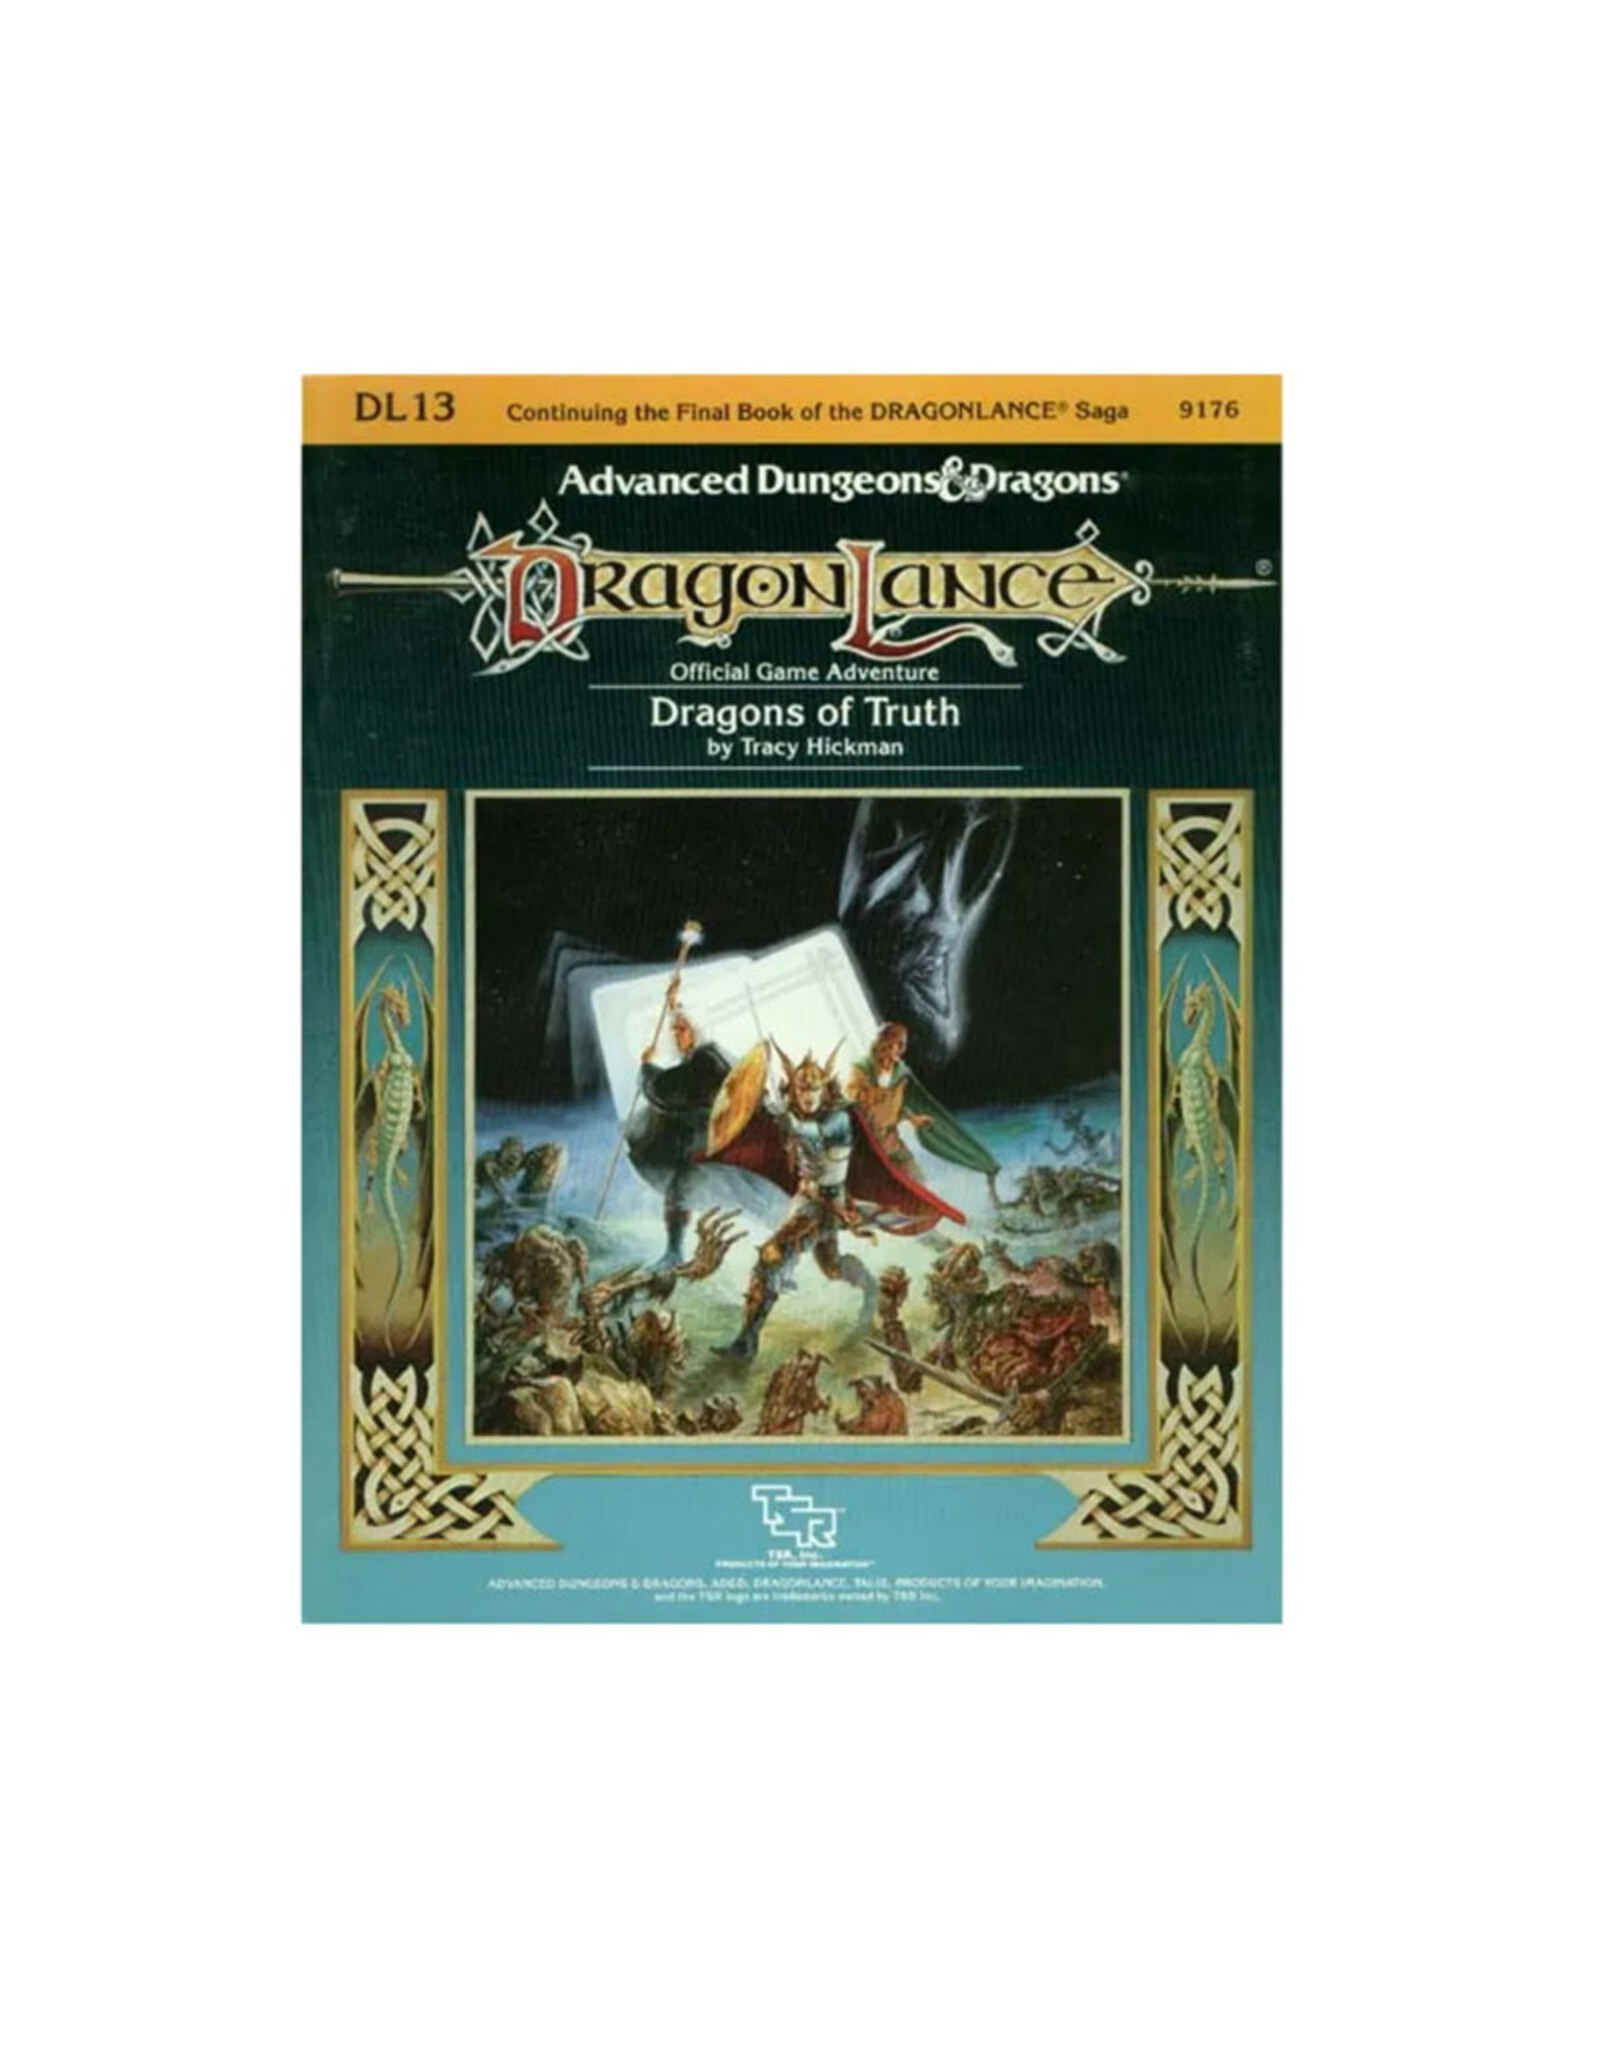 TSR USED - Advanced Dungeons & Dragons Dragon Lance: Dragons of Truth DL13